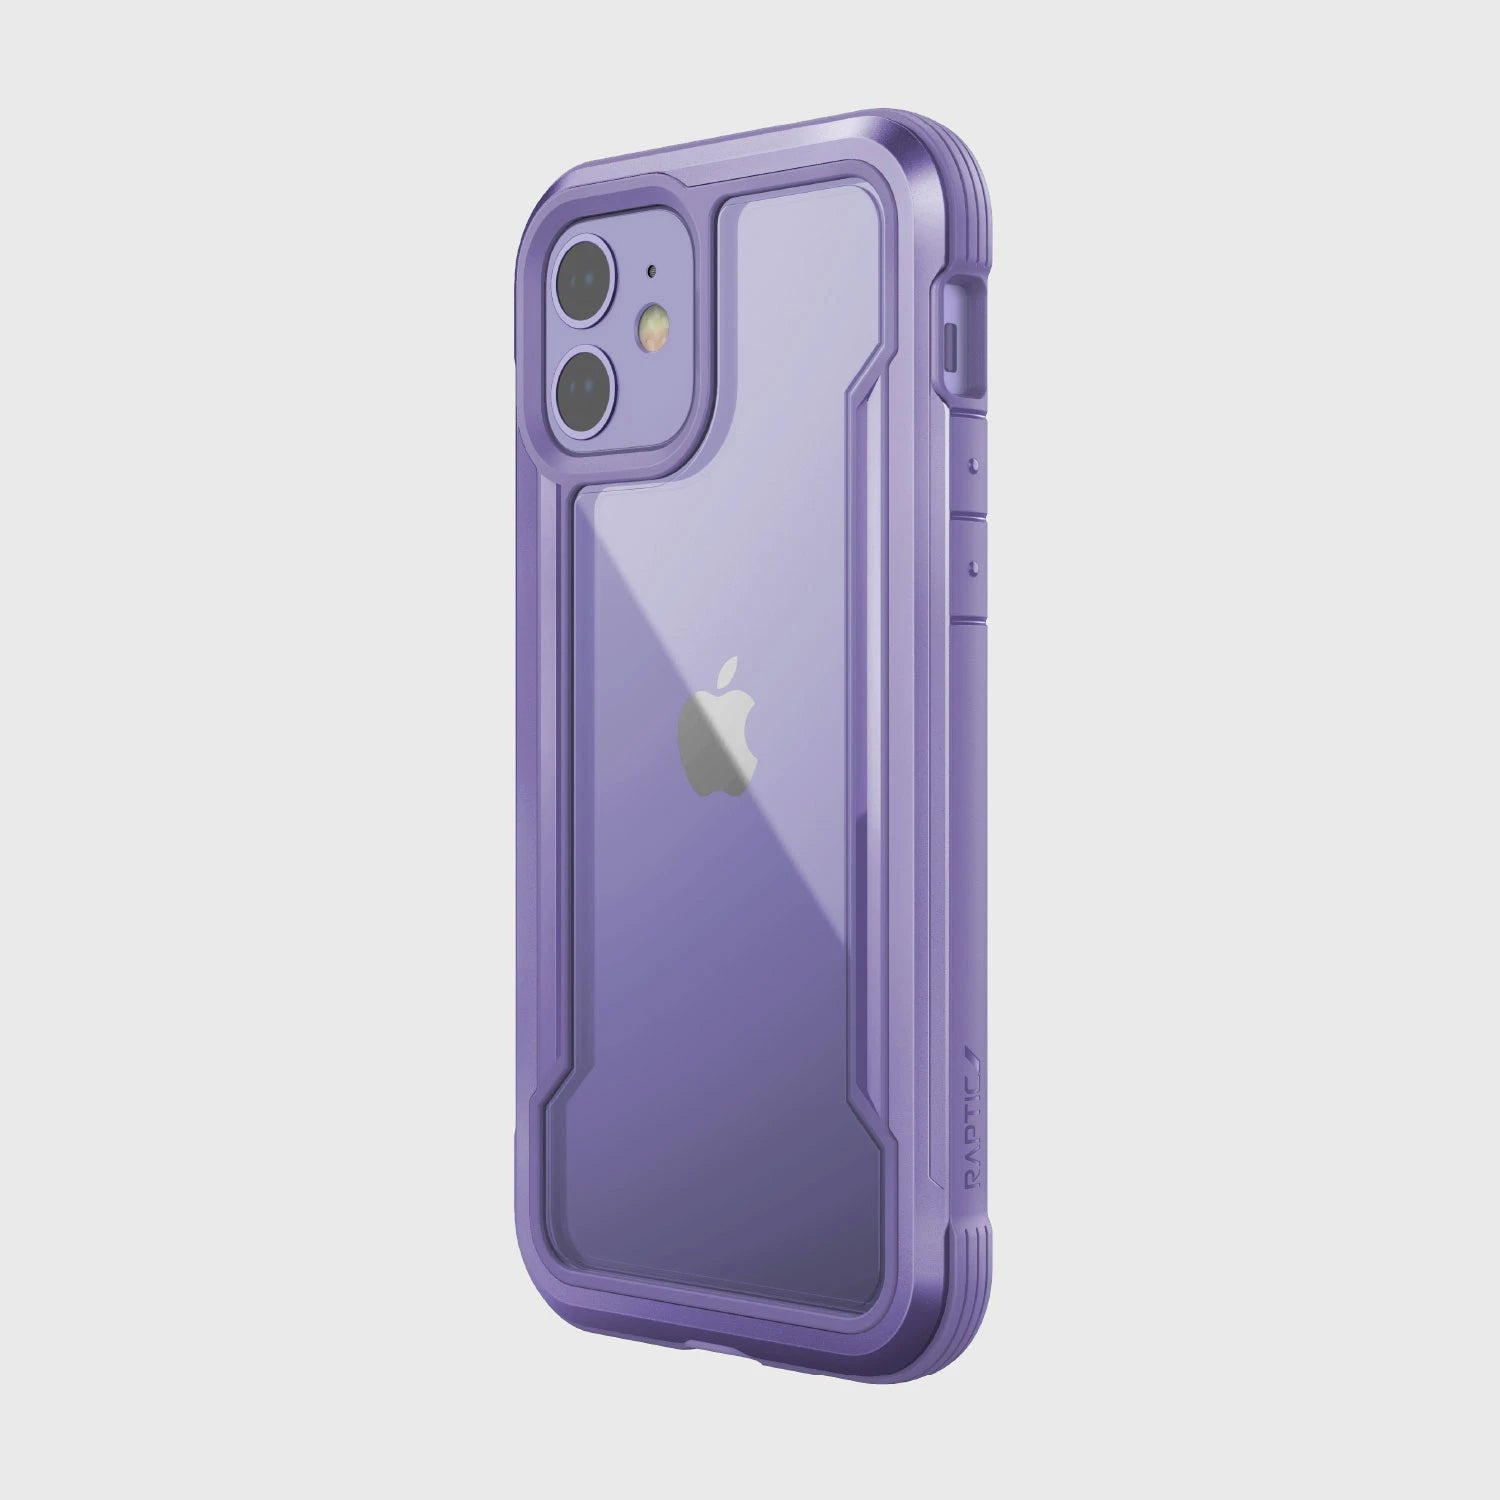 The purple SHIELD iPhone 12 & iPhone 12 Pro Case by Raptic is shown on a white background, providing protection for your device.